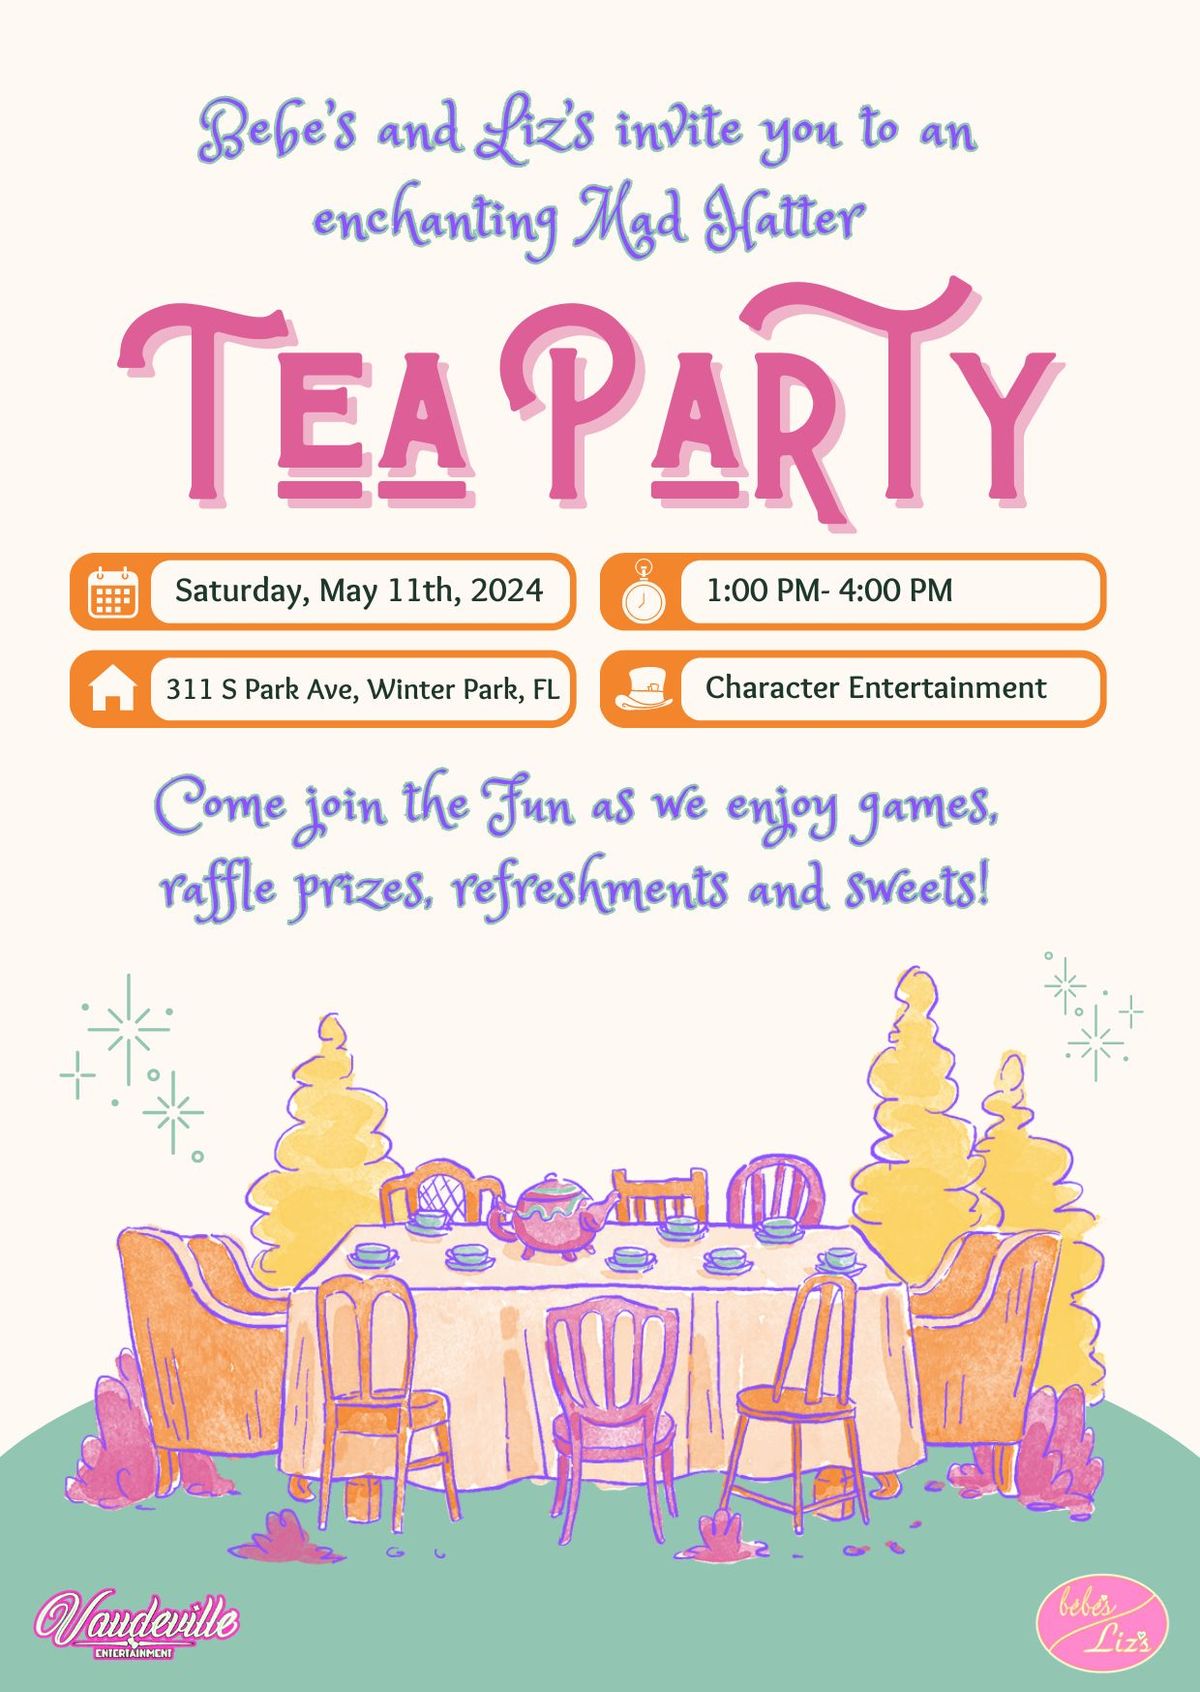 Enchanting Mad Hatter Tea Party! ???